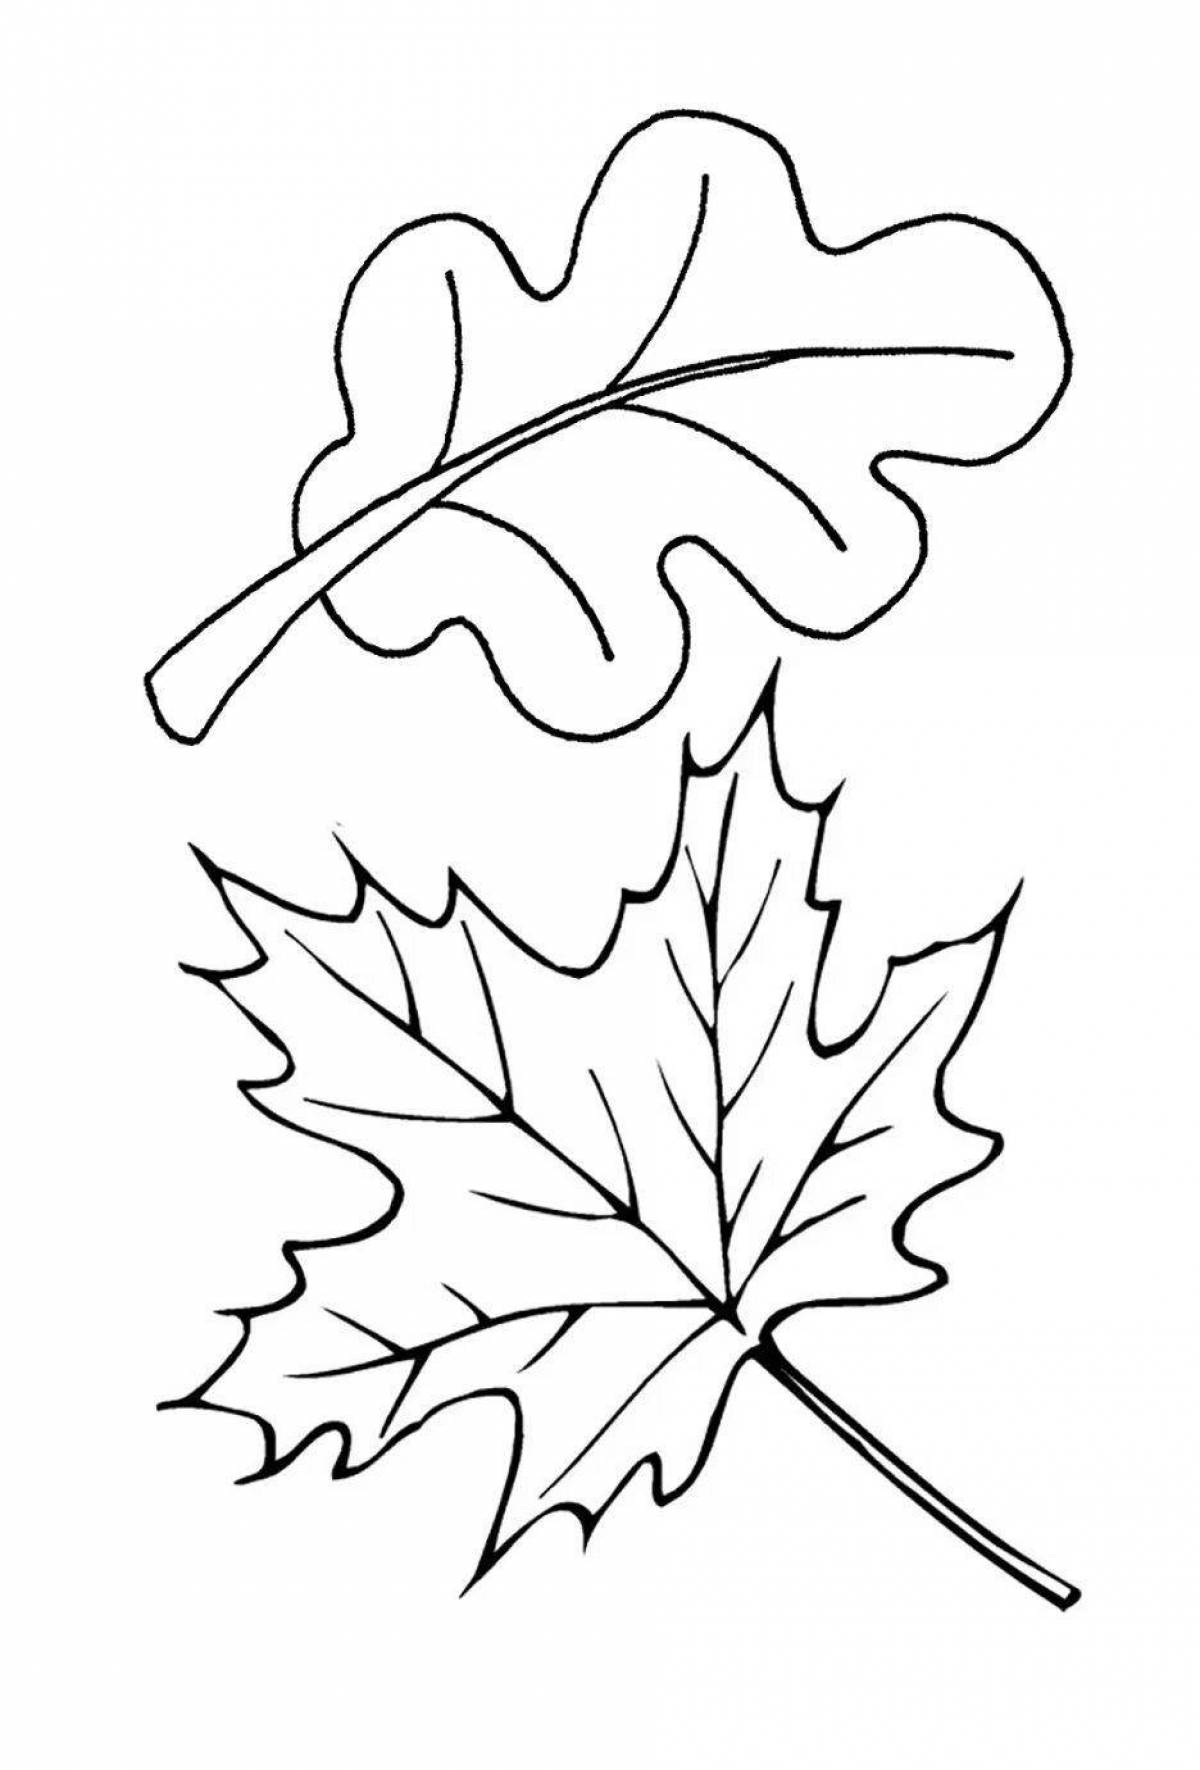 Glowing maple leaf coloring book for kids